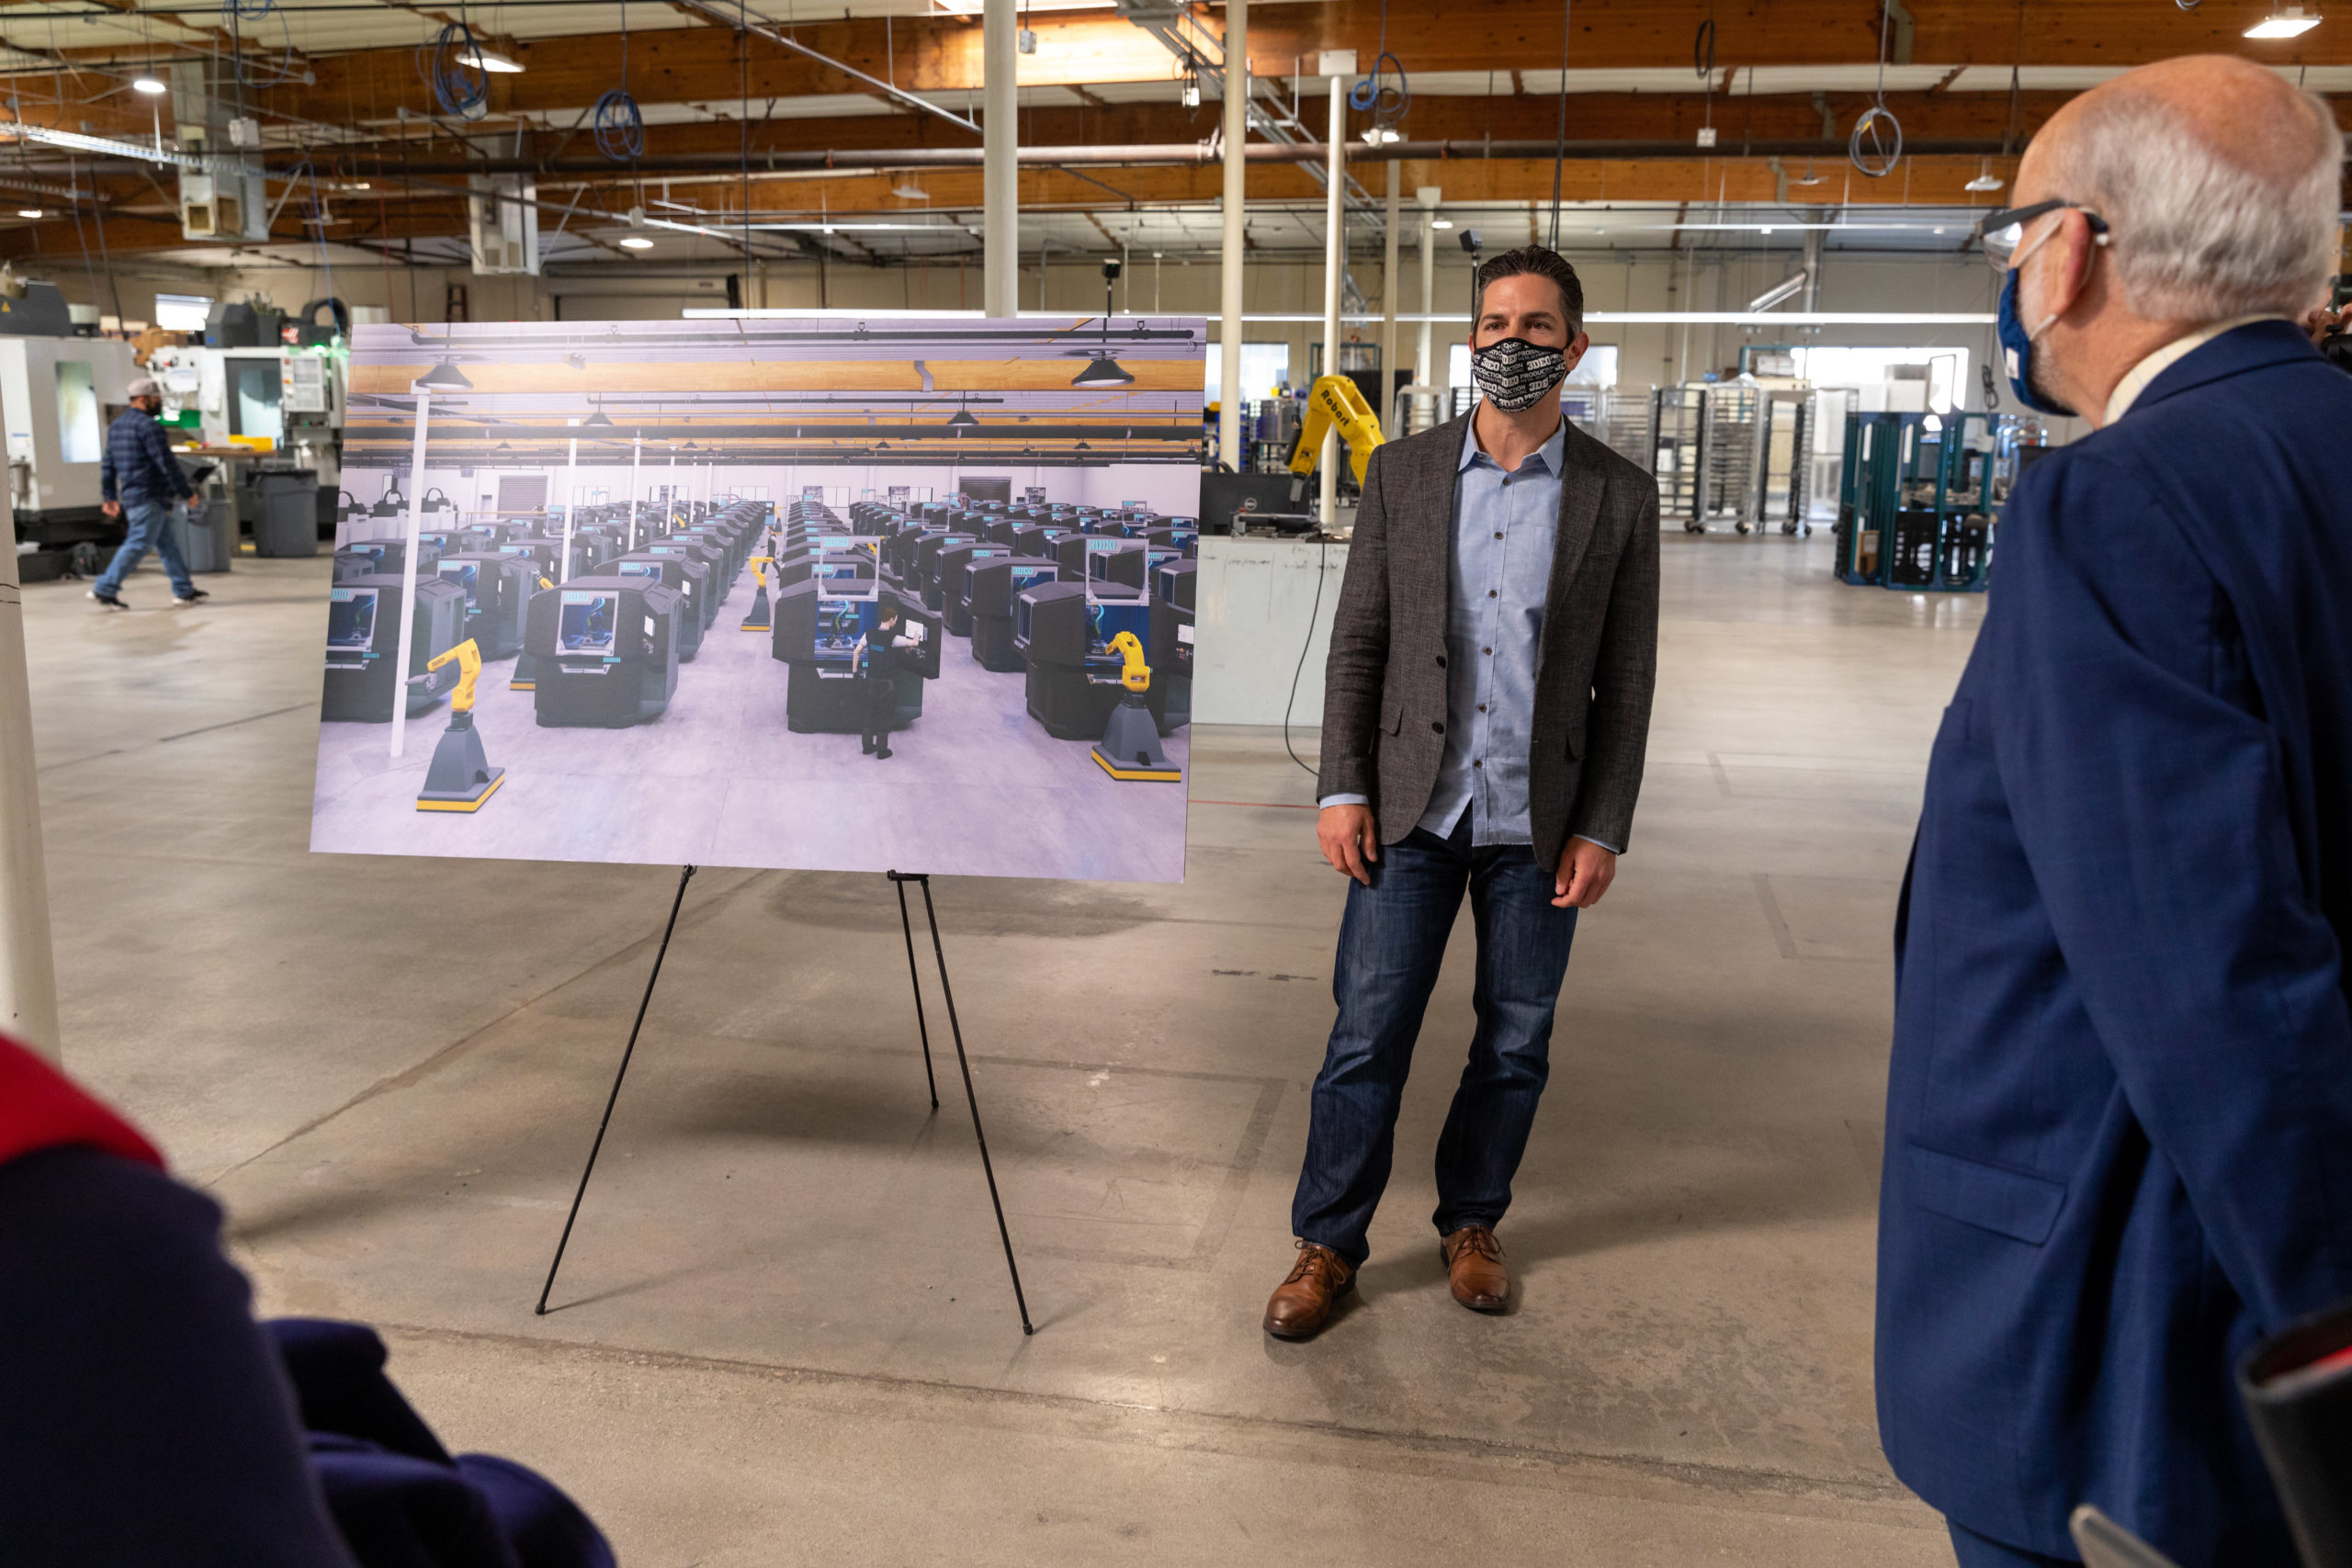 A man in a mask and blazer discusses a large printed photo of a factory floor with another person in a factory setting.